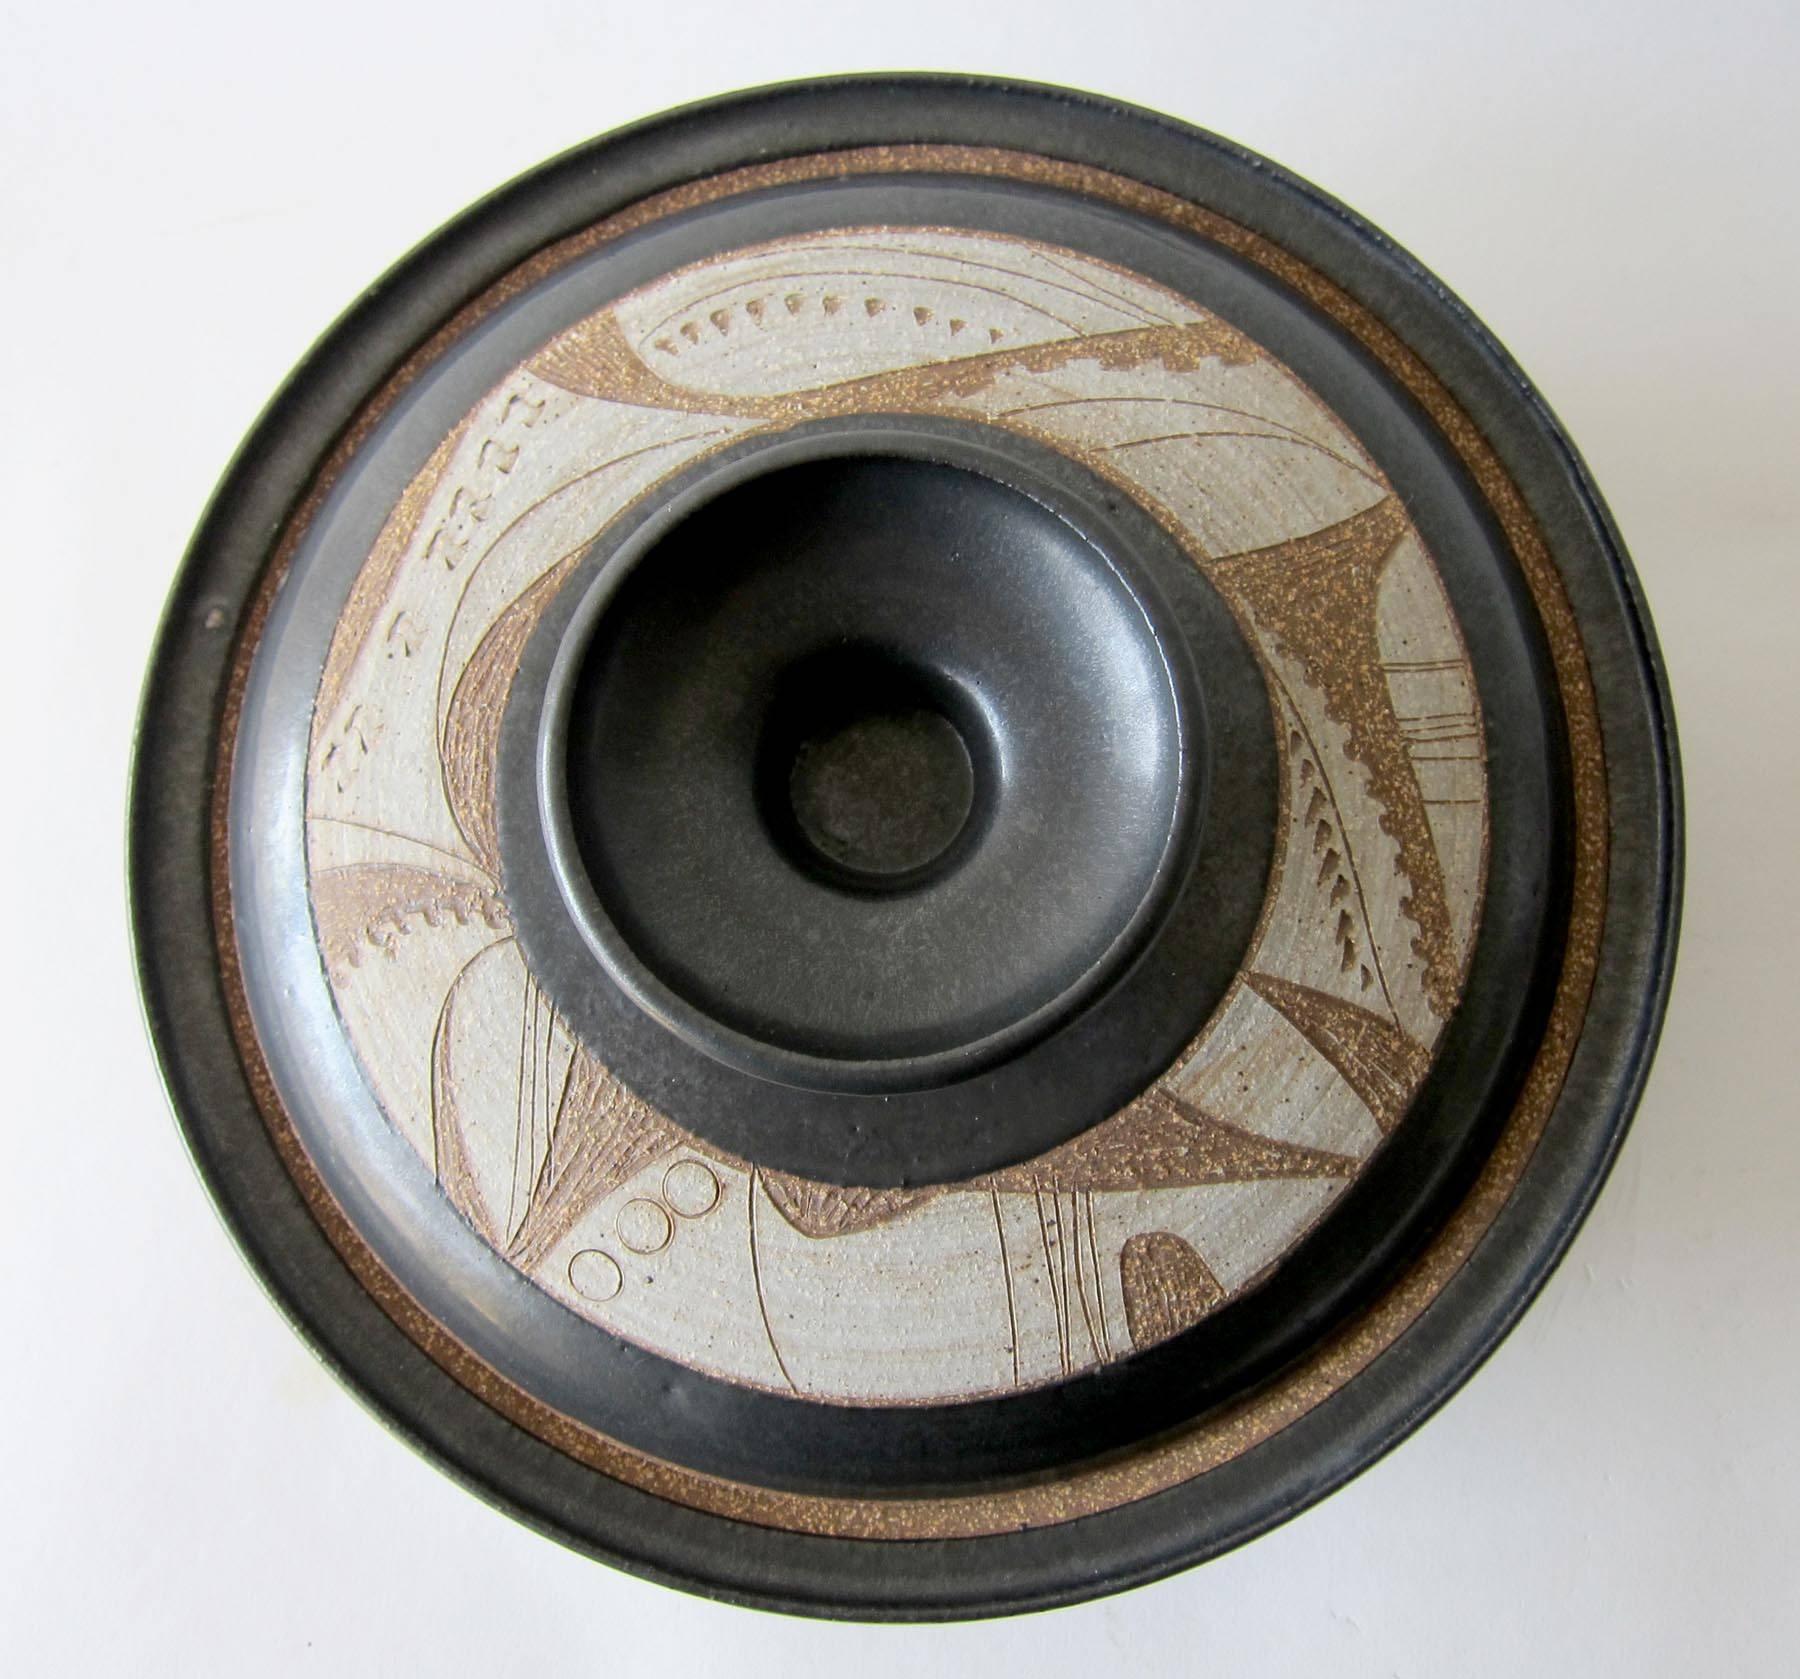 Covered bowl or casserole created by California ceramist Joel Edwards. Bowl measures 5.5